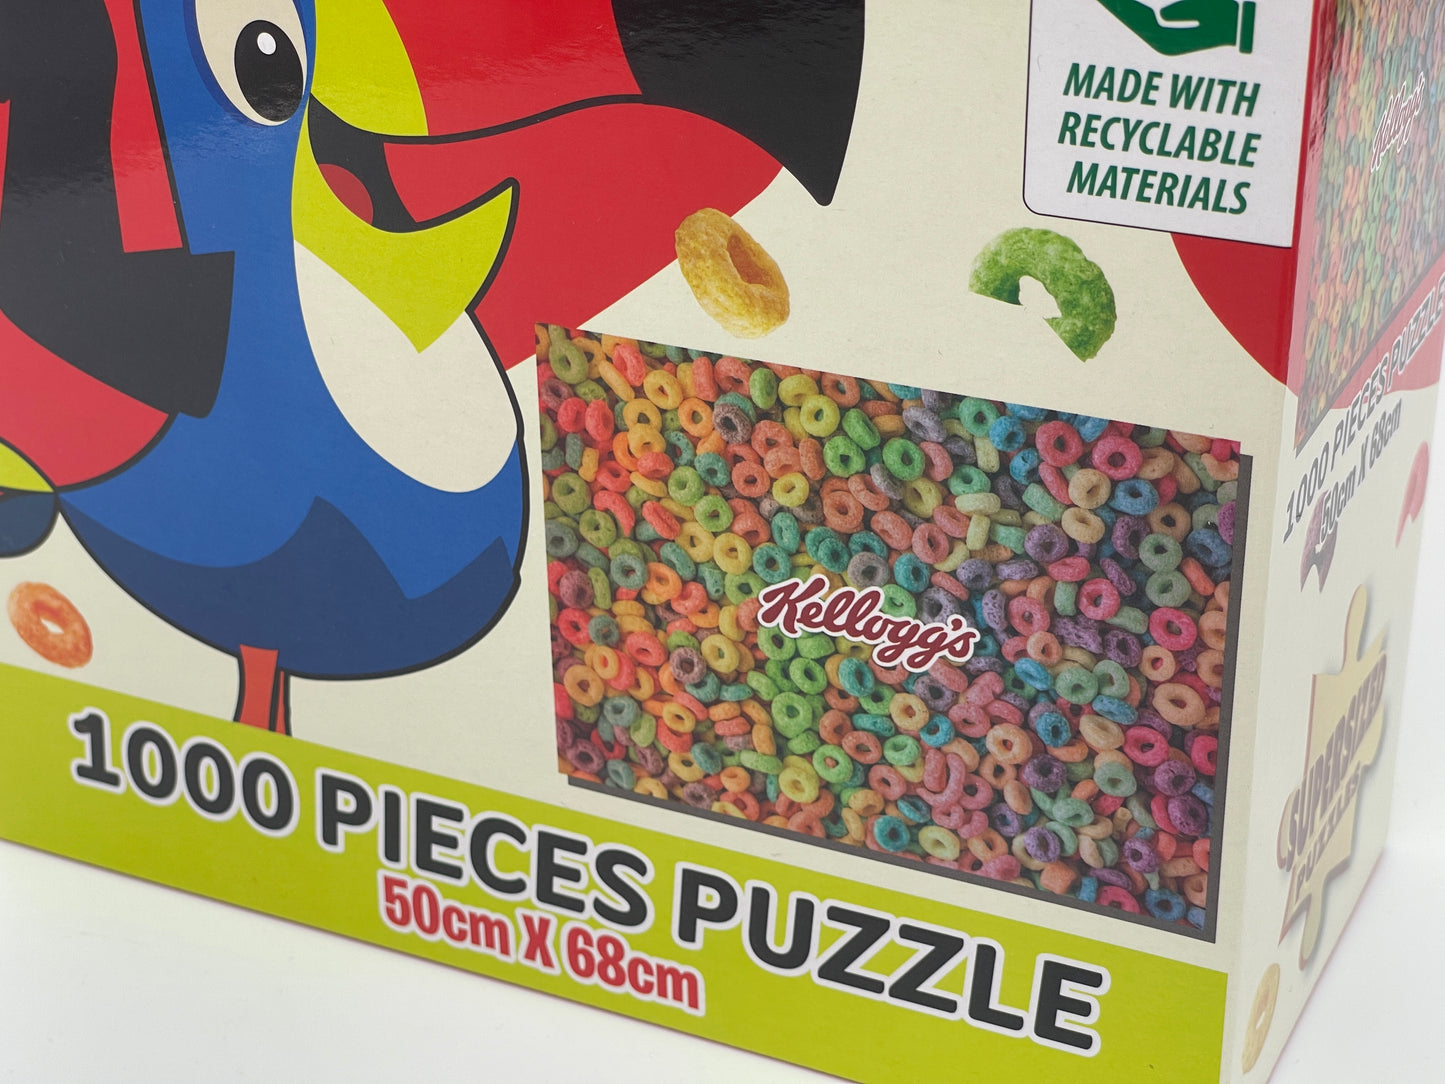 Kellogg's Froot Loops 1000 Piece Jigsaw Puzzle 50 x 68 cm Supersized Puzzle / Puzzle